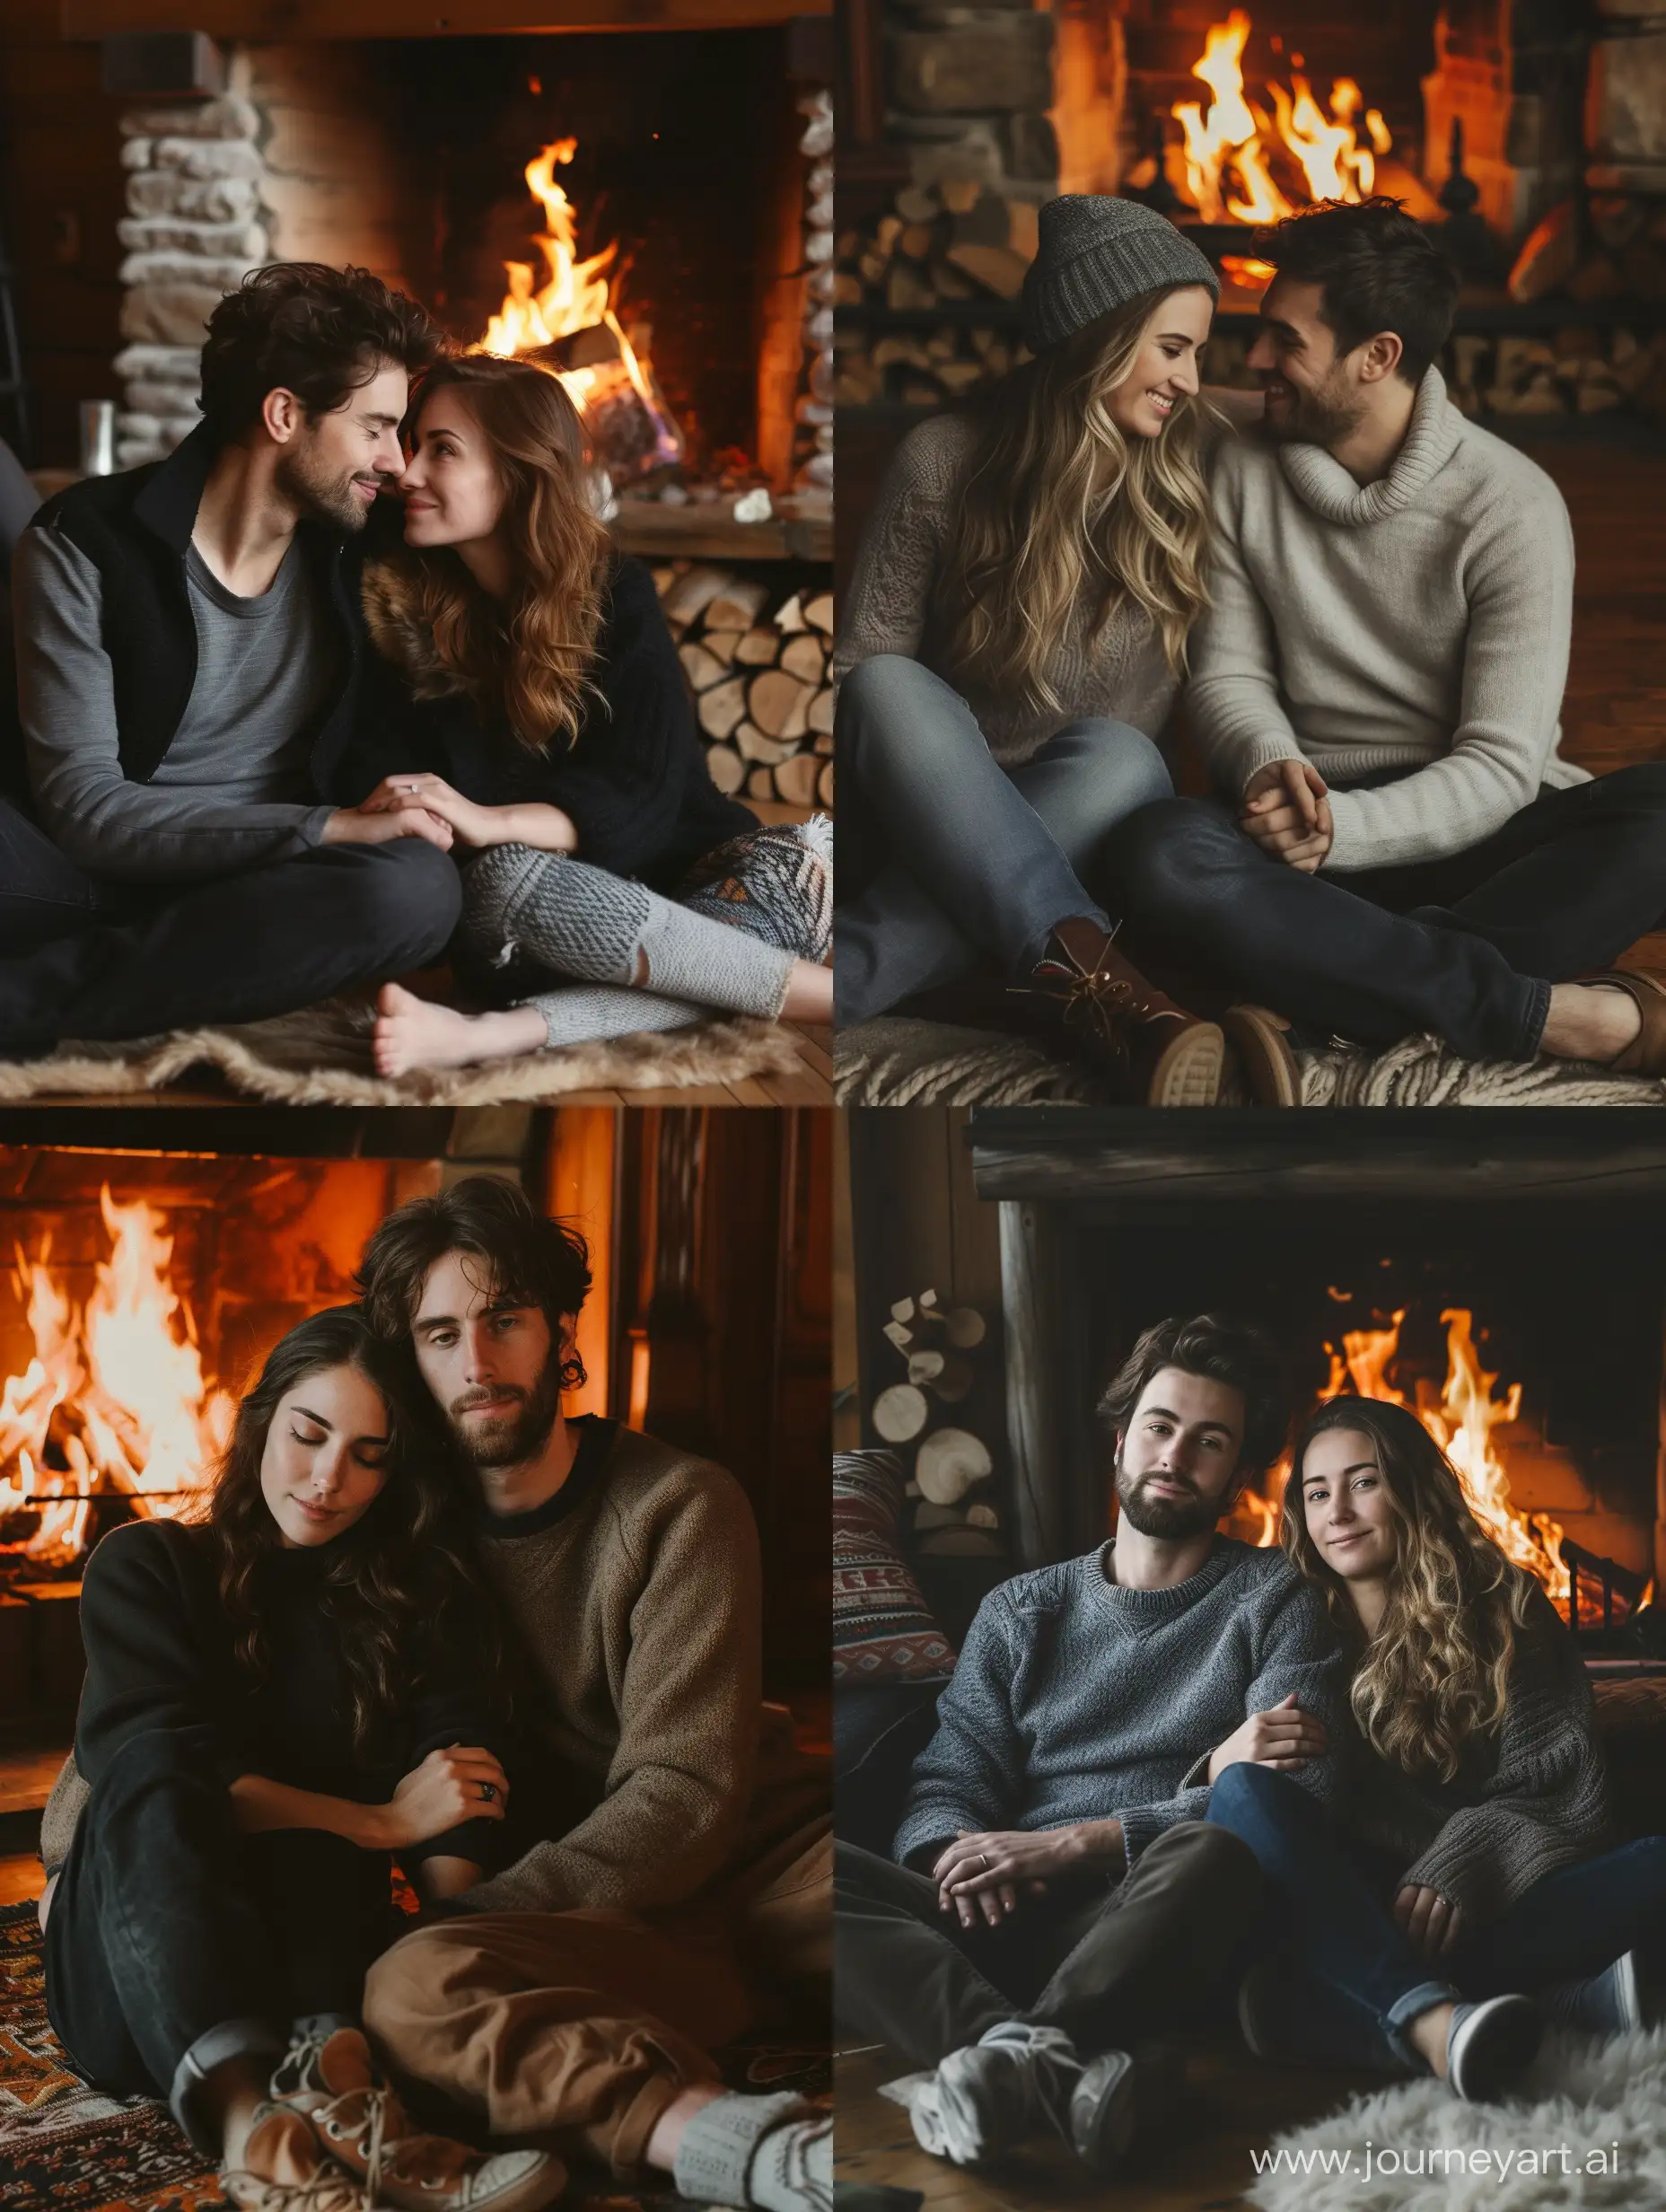 Man and woman sitting on the floor near a burning fireplace in a romantic and cozy setting realistic photo facial detail clearly visible canon